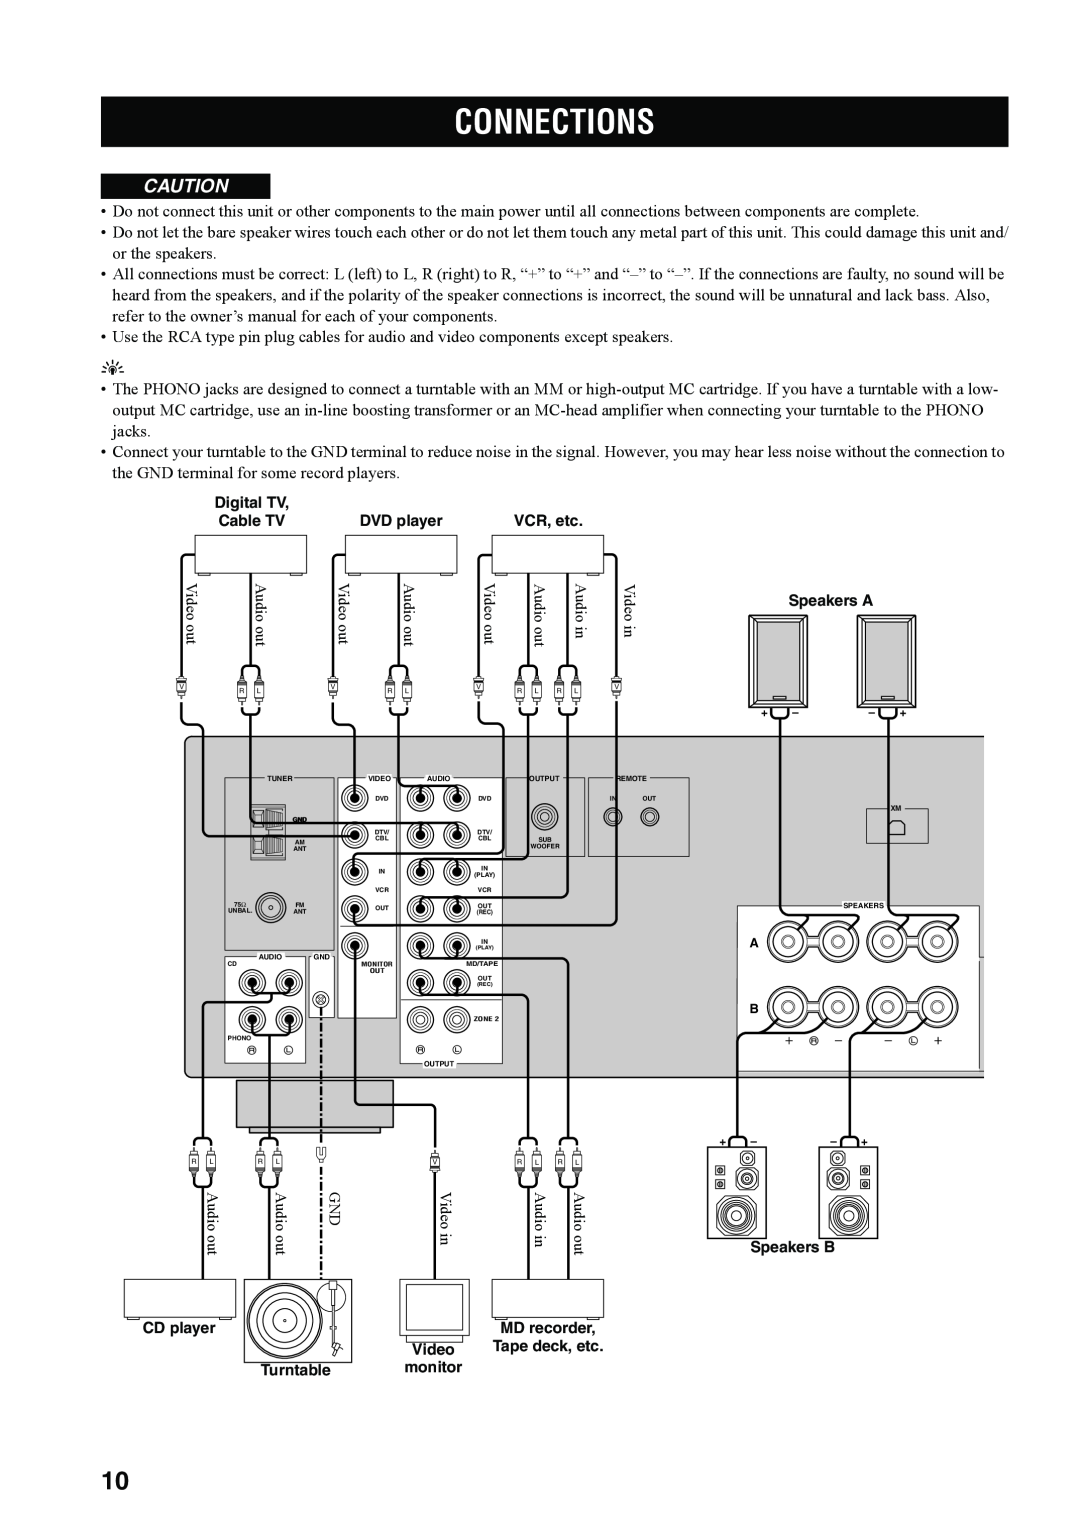 Yamaha RX-497 owner manual Connections 